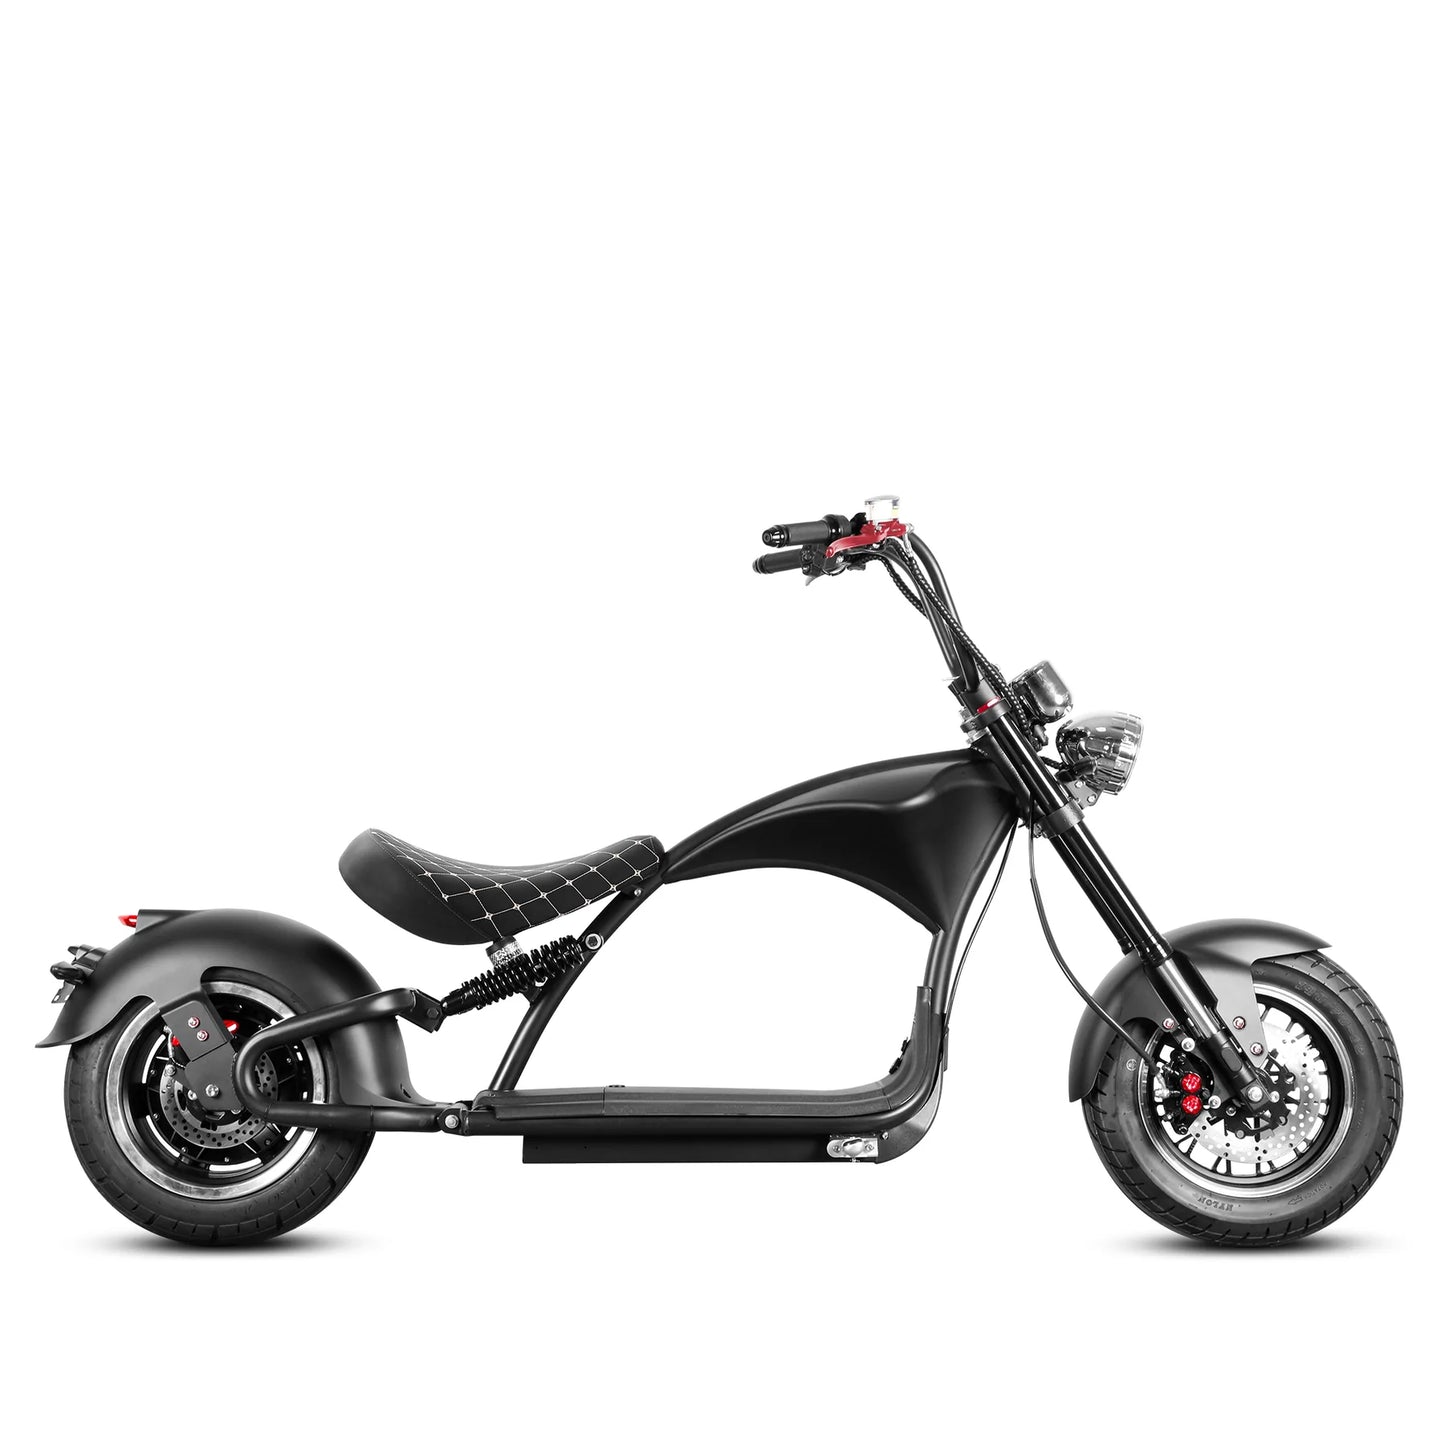 Eahora Emars M1P Electric Scooter - Black | Bike Lover USA